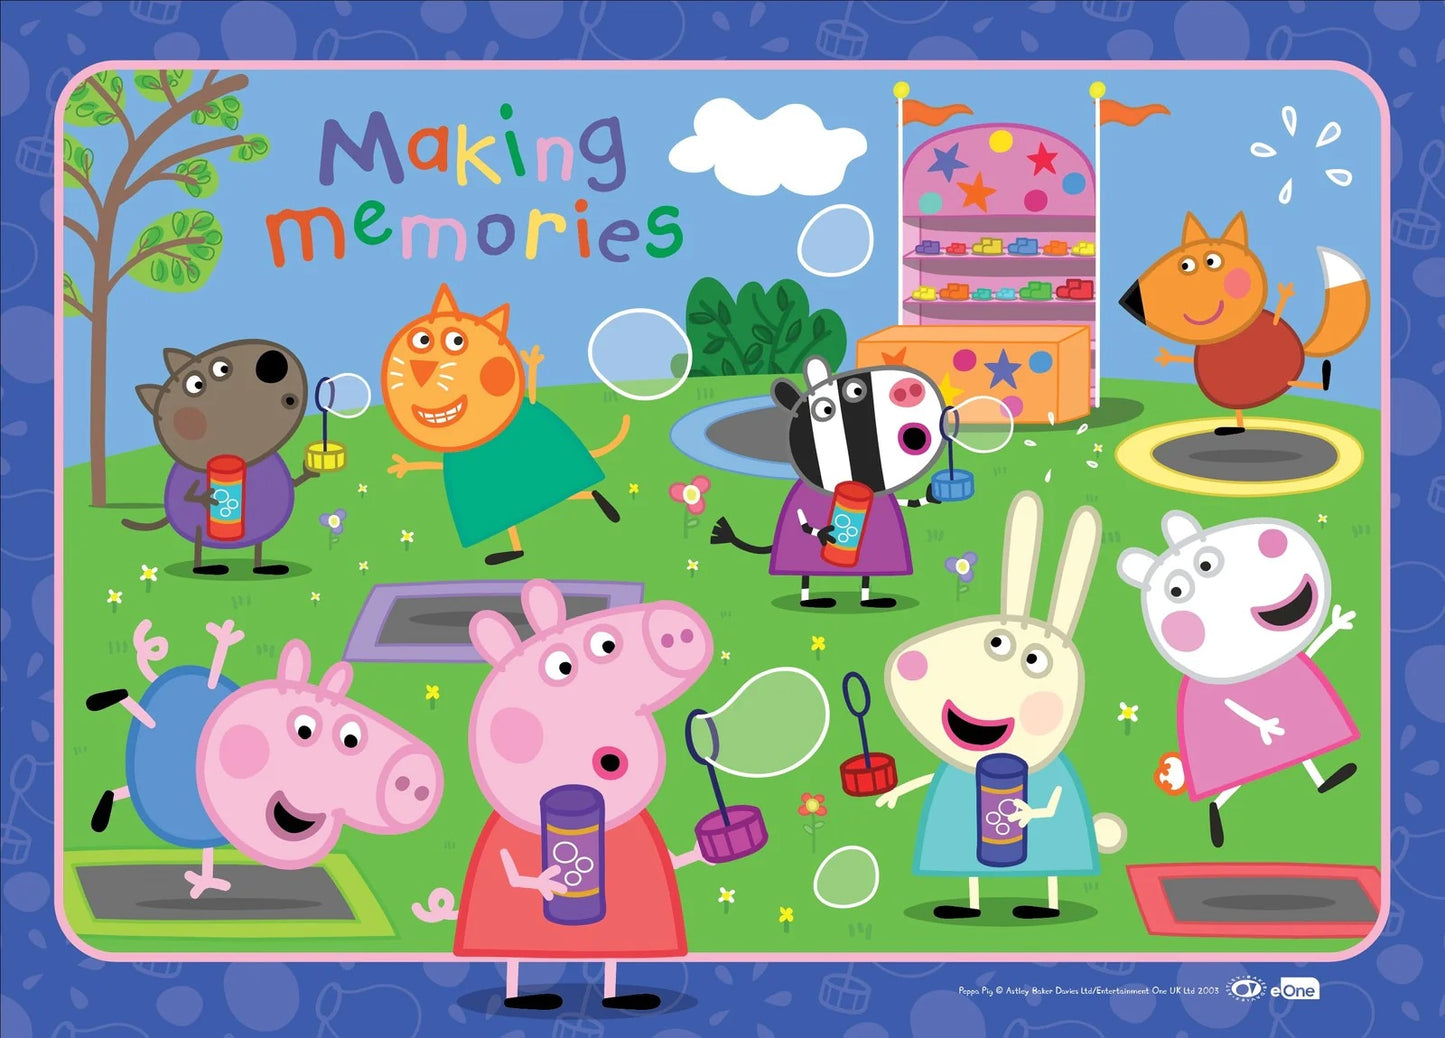 Peppa Pig Tray Puzzle